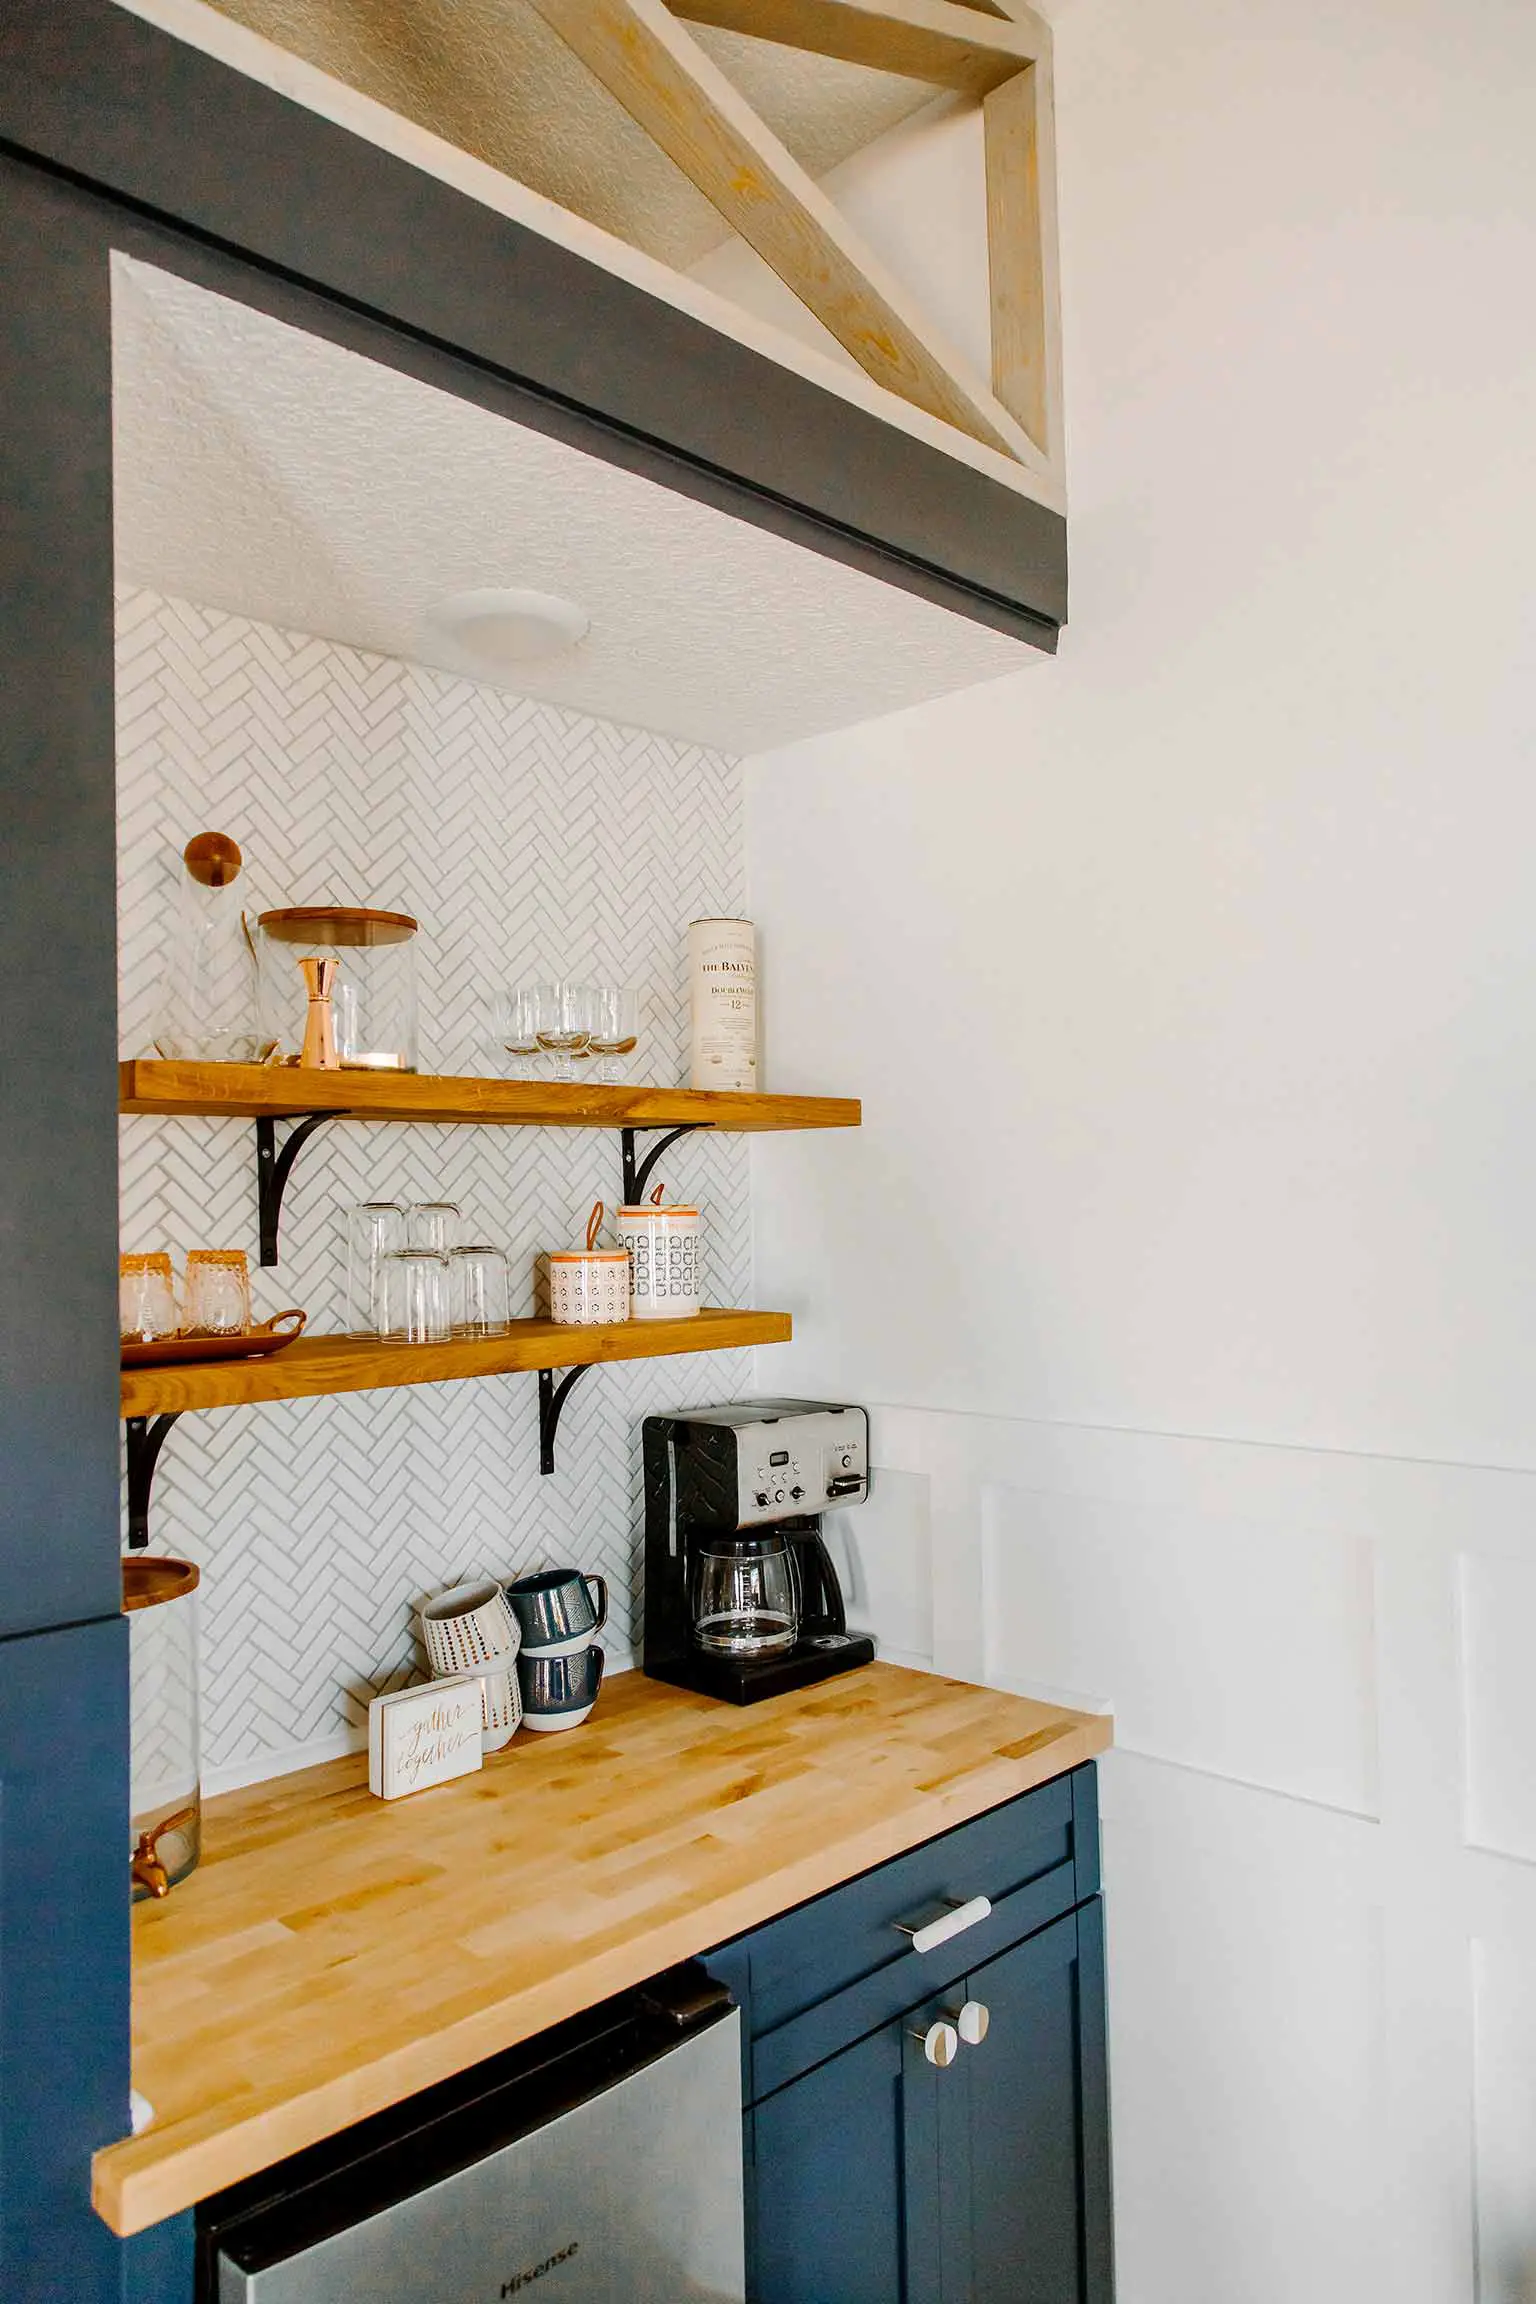 Kitchenette with hale navy cabinets, open shelving and herringbone tile - The Guest House Reveal - That Homebird Life Blog